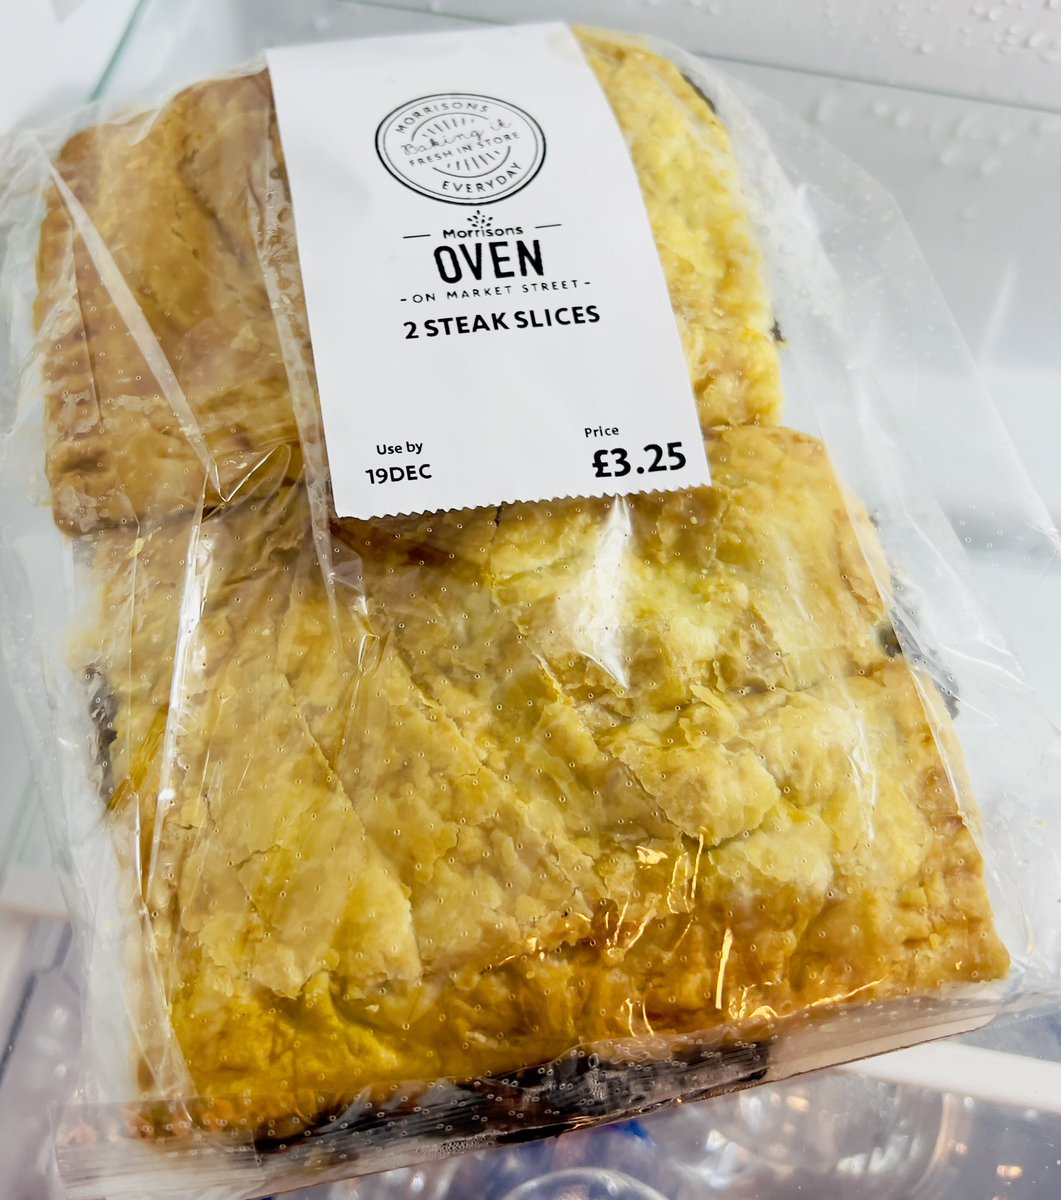 @morrisons backsliding here. Why are these products now packaged in #plastic when for years, pies & pastries came in brown paper packs? @ThinkingGreenGI @NautilusGib